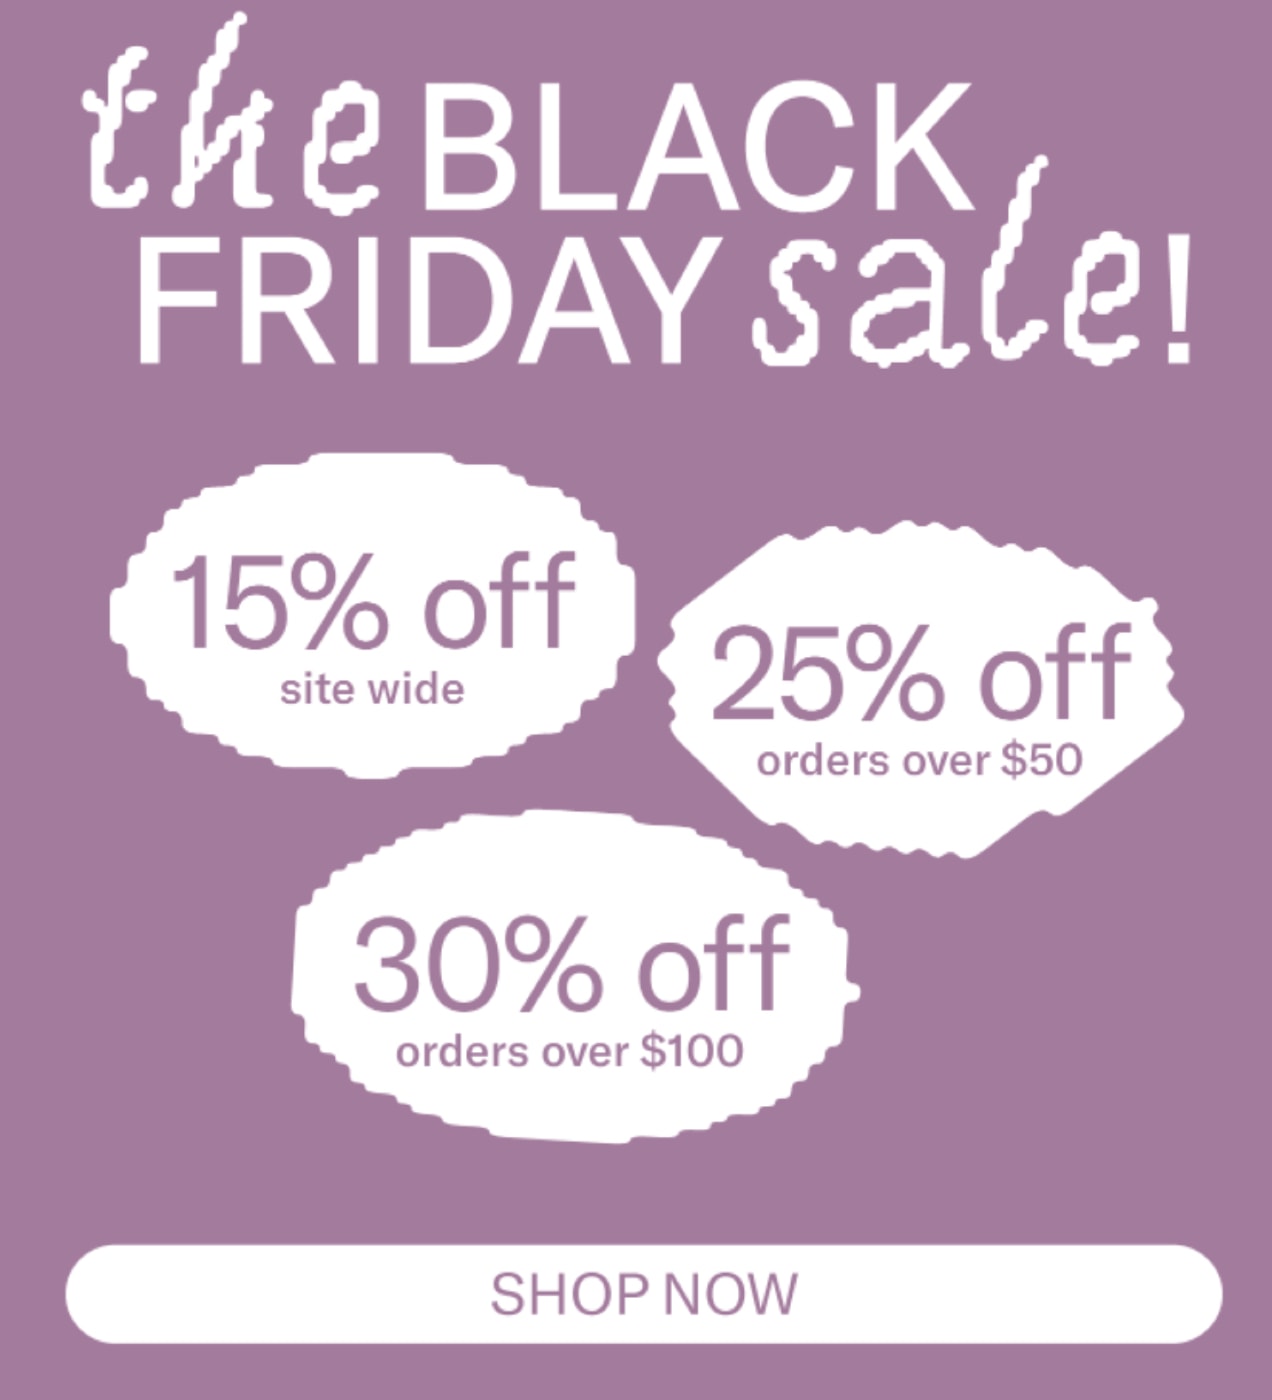 percent off discounts listed in an email